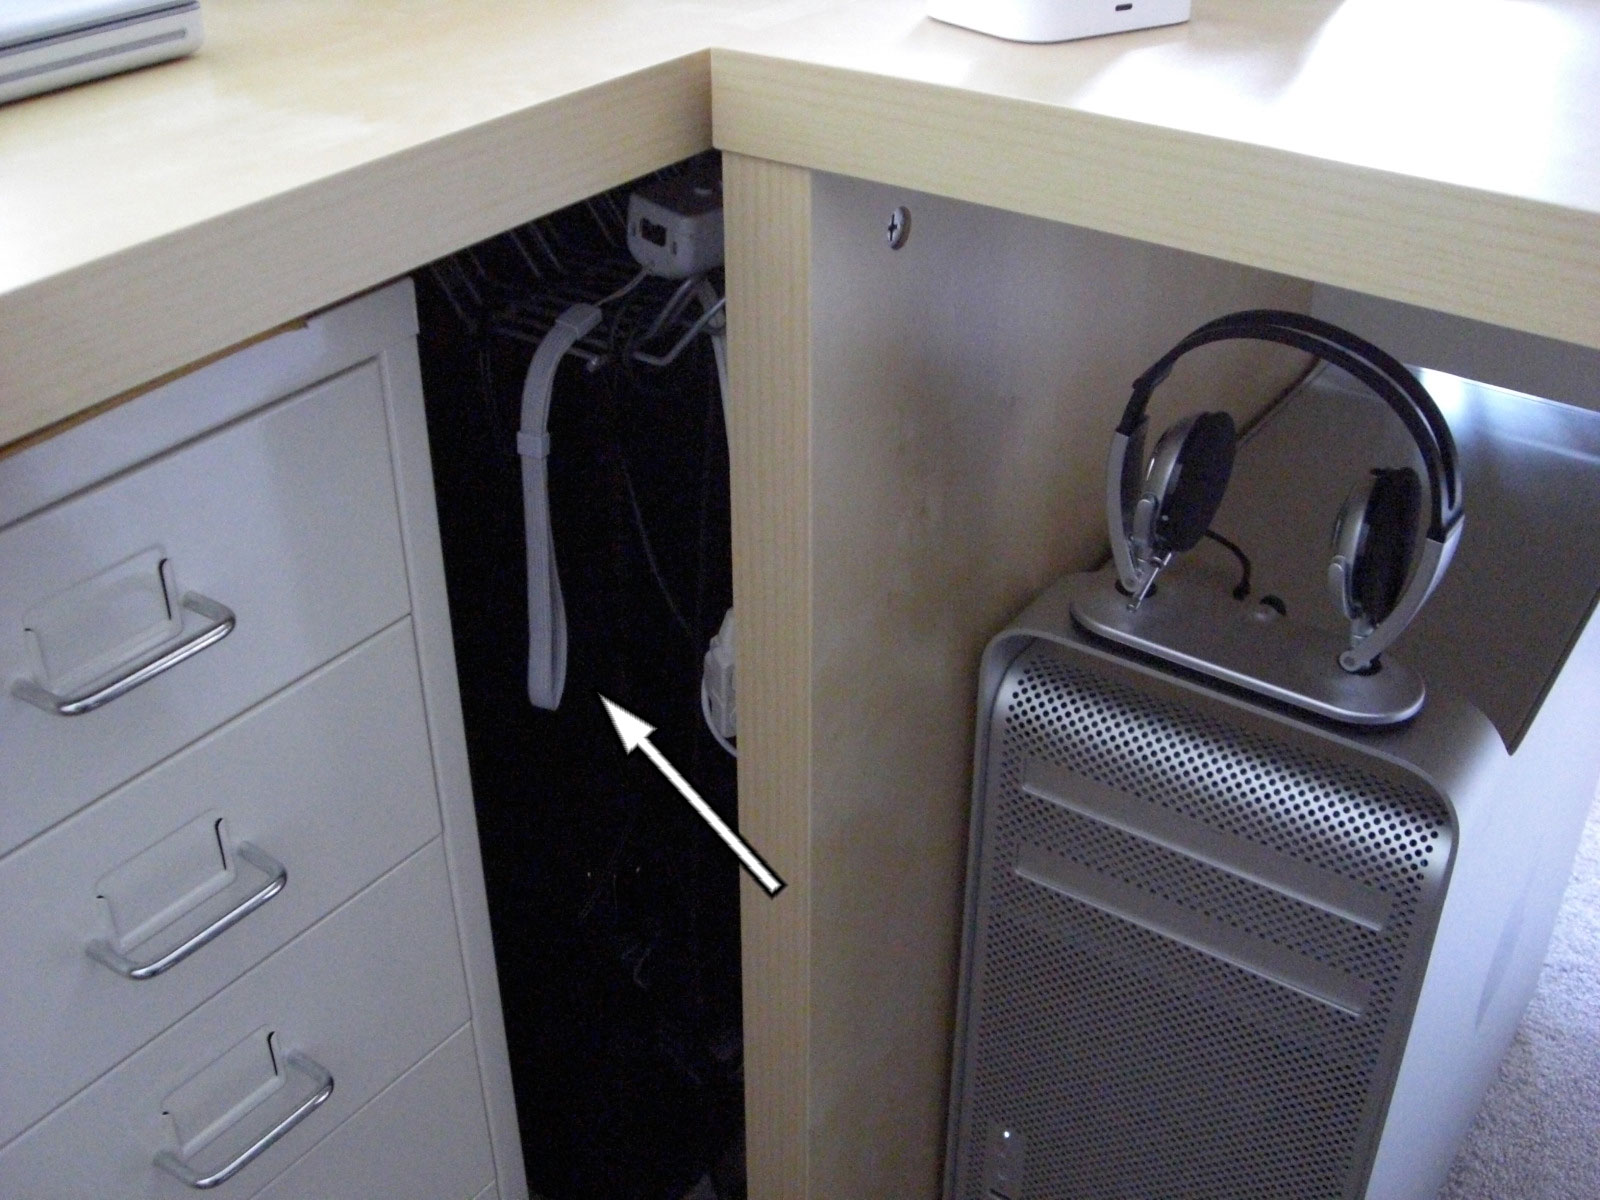 there is a small metal cabinet under a desk